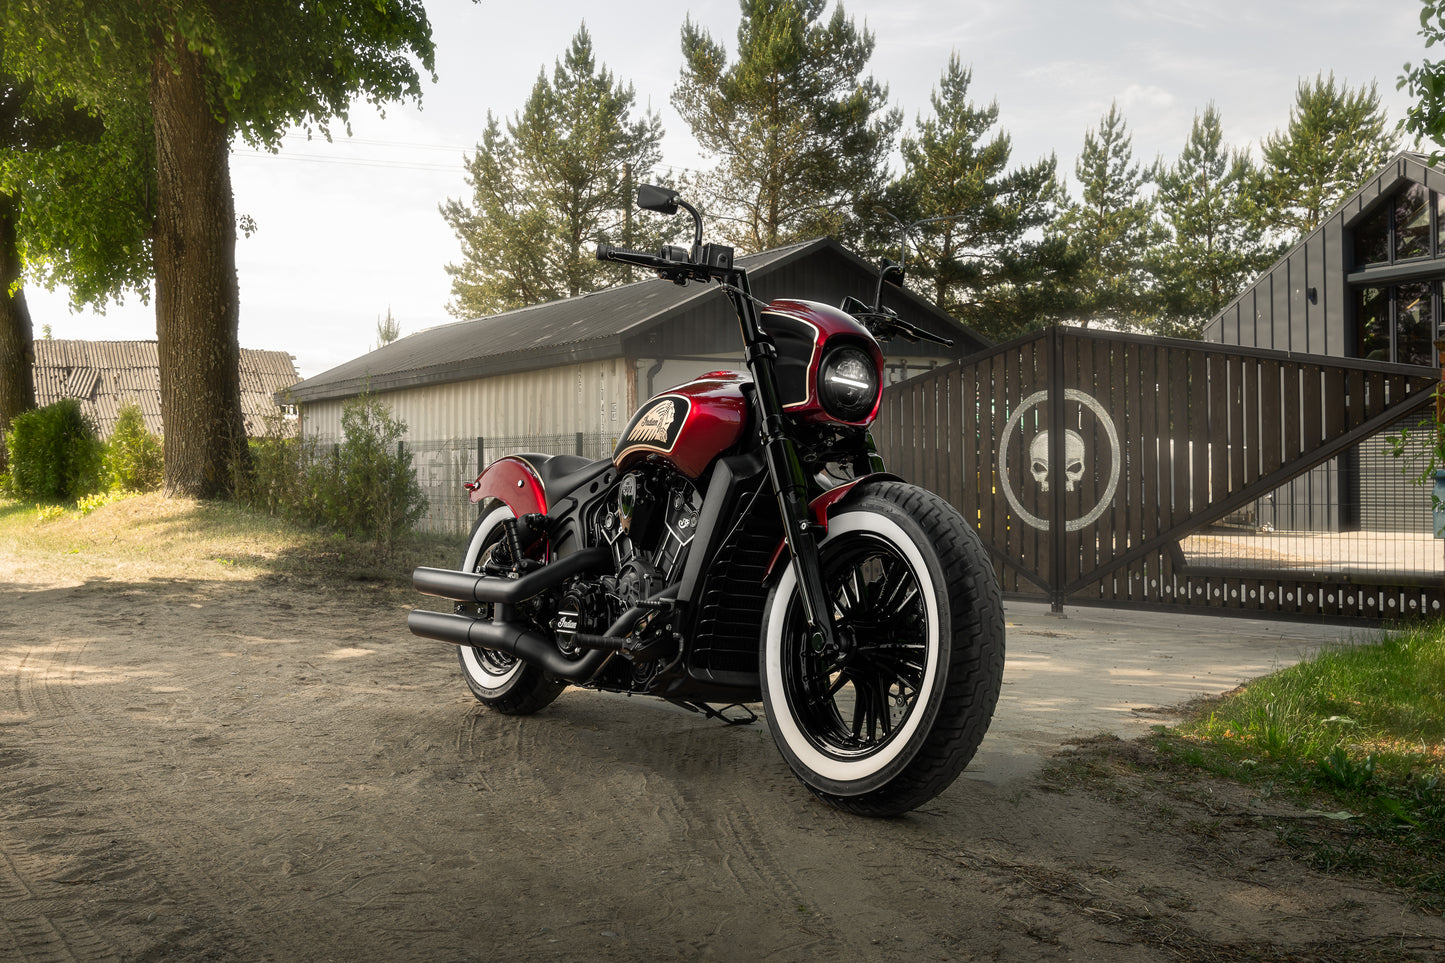 Harley Davidson motorcycle with Killer Custom "Tomahawk" full fork covers set from the front with a fence and a few buildings in the background